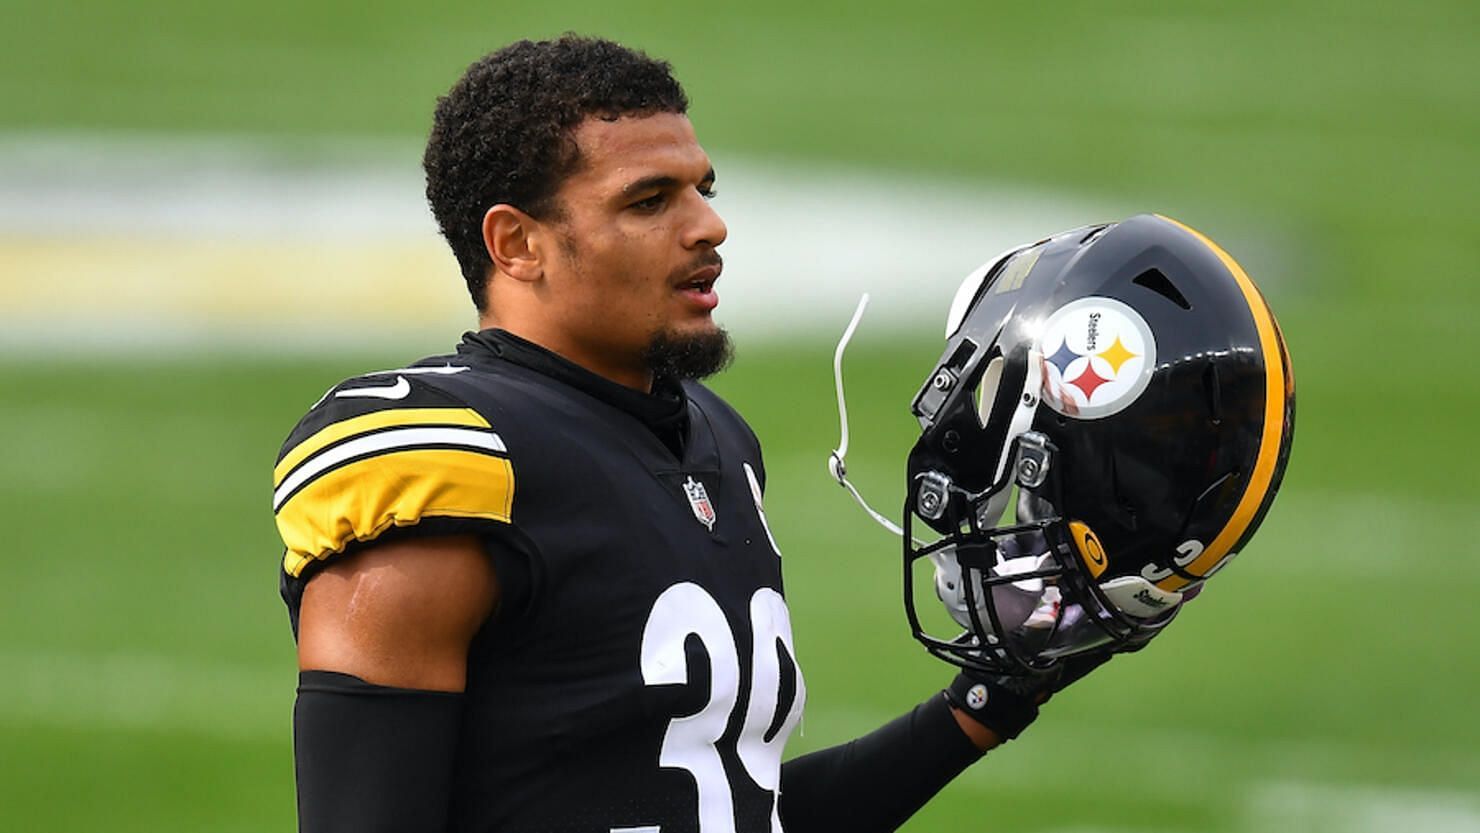 Minkah Fitzpatrick Injury Update: Latest on Steelers Safety for Week 16 Fantasy Football